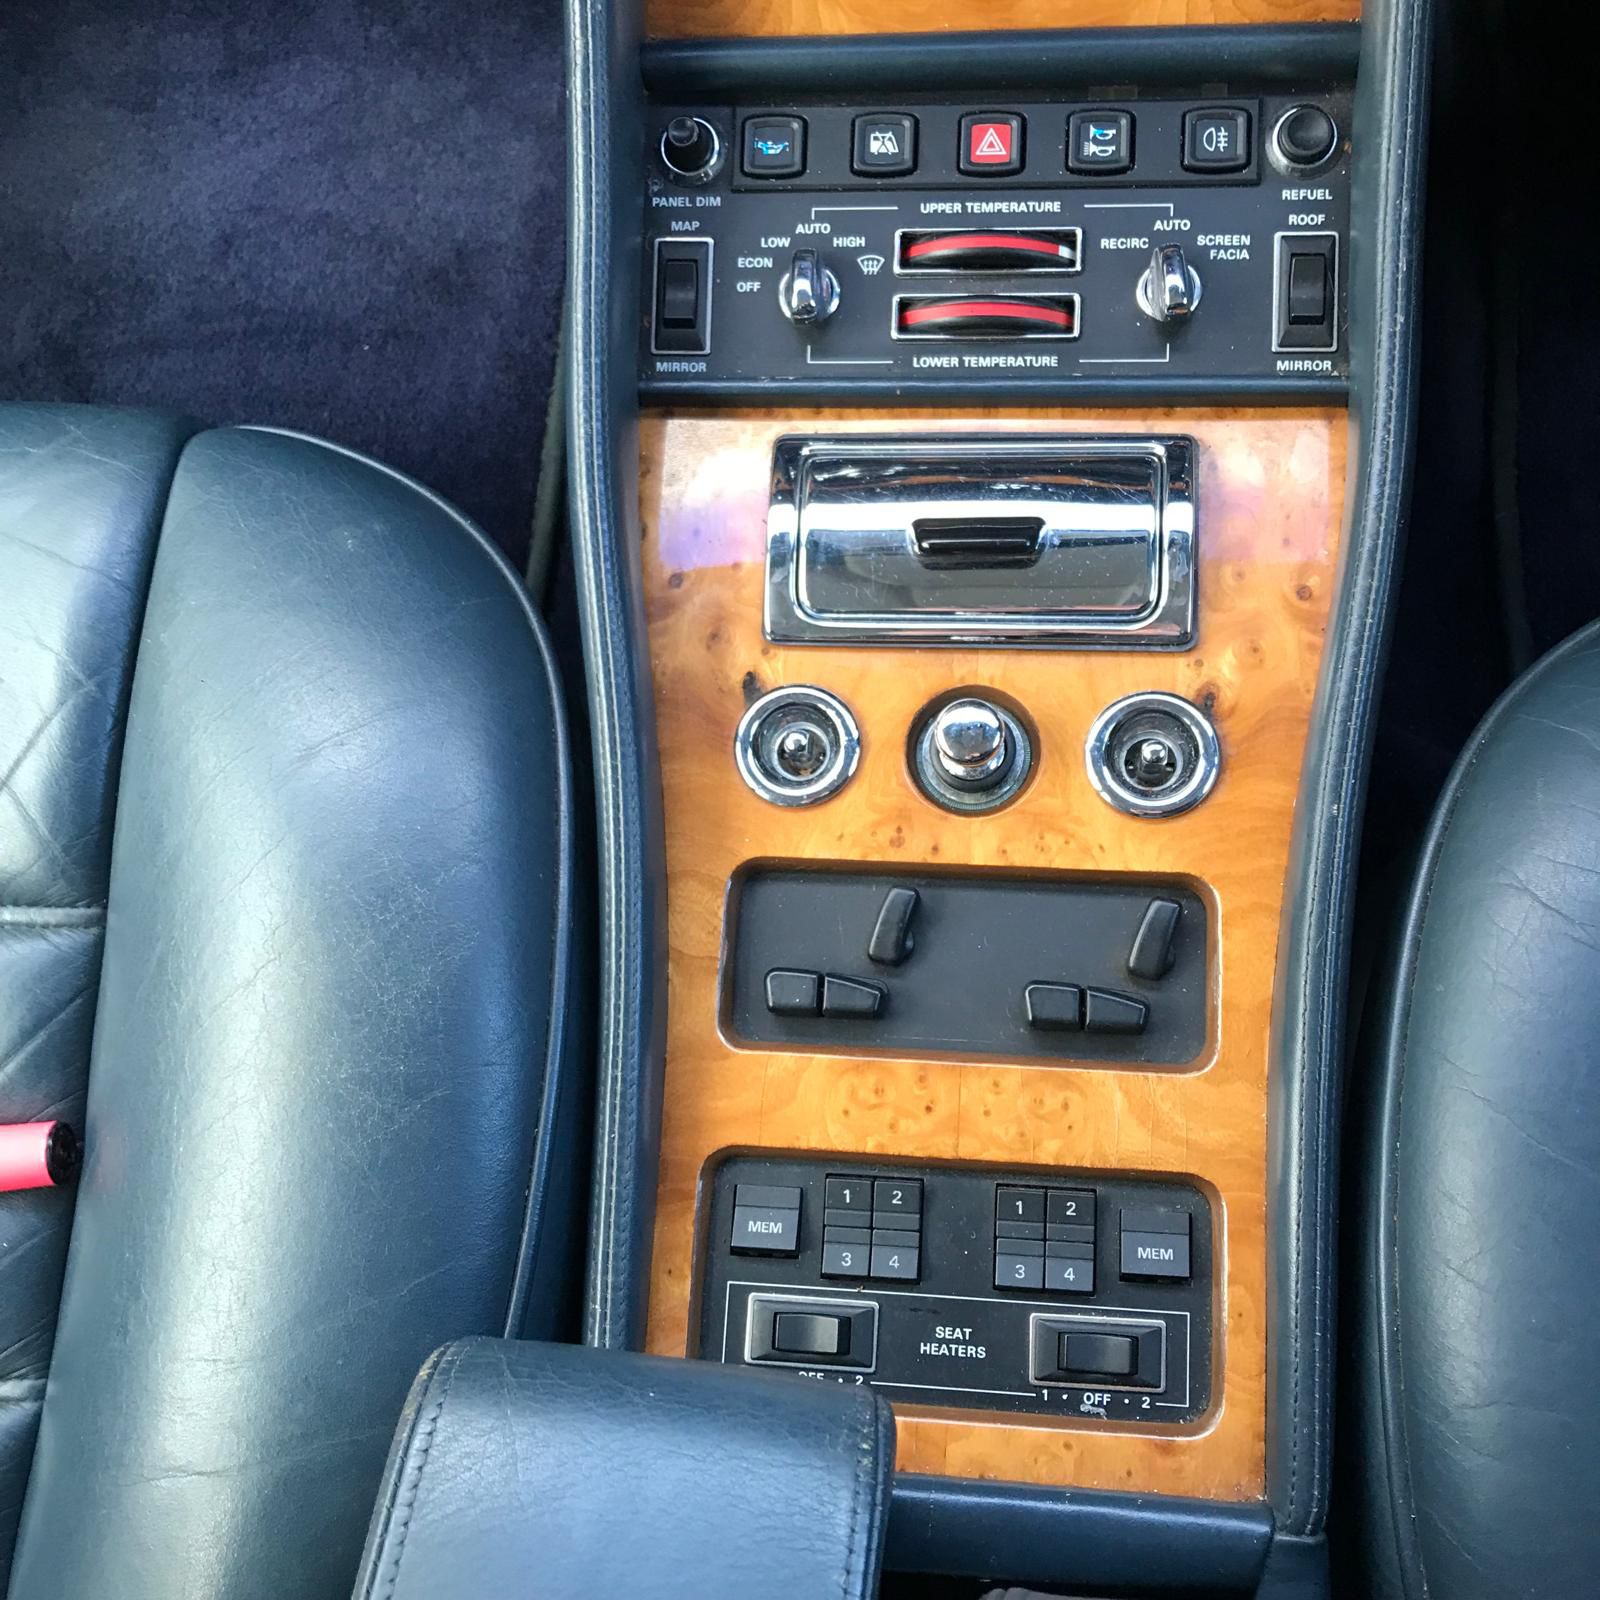 1990 Bentley Mulsanne S - Entry level motoring at a low estimate - Image 11 of 22